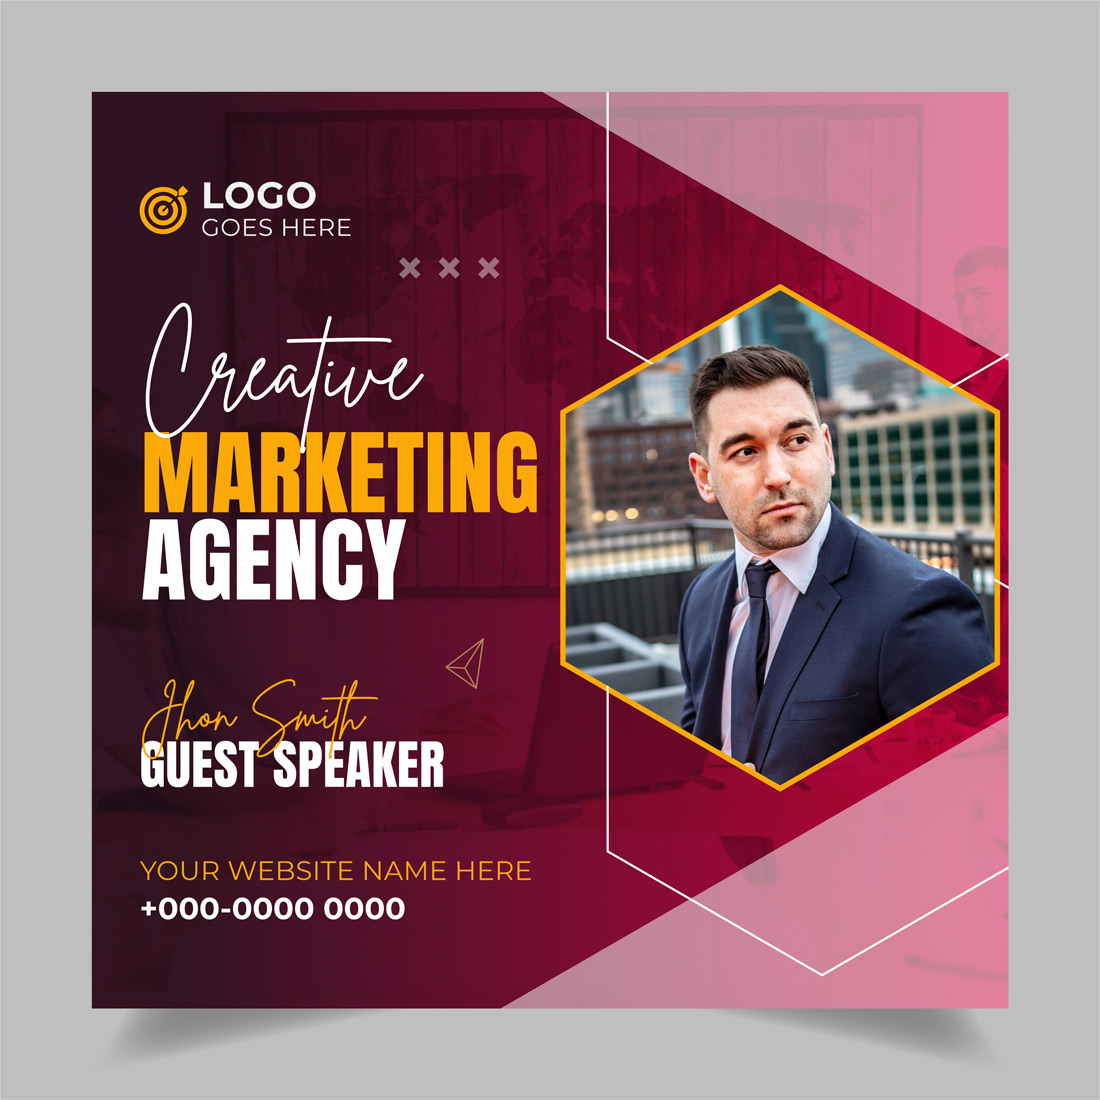 Digital marketing agency webinar or corporate social media post template vector only-$4 cover image.